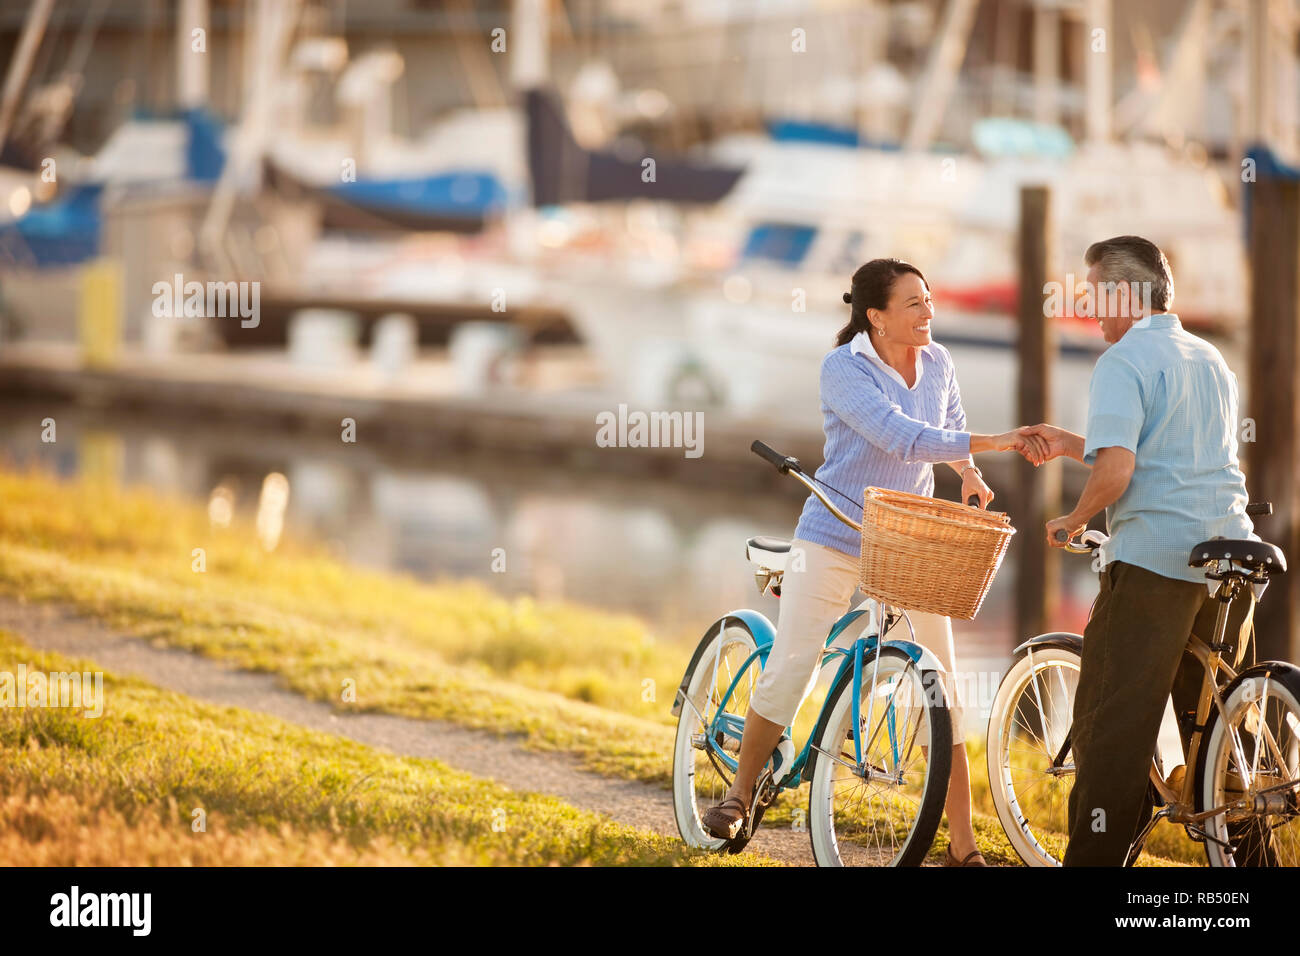 Middle Aged Couple Hold Hands And Look At Each Other While Riding Bicycles At A Boat Marina